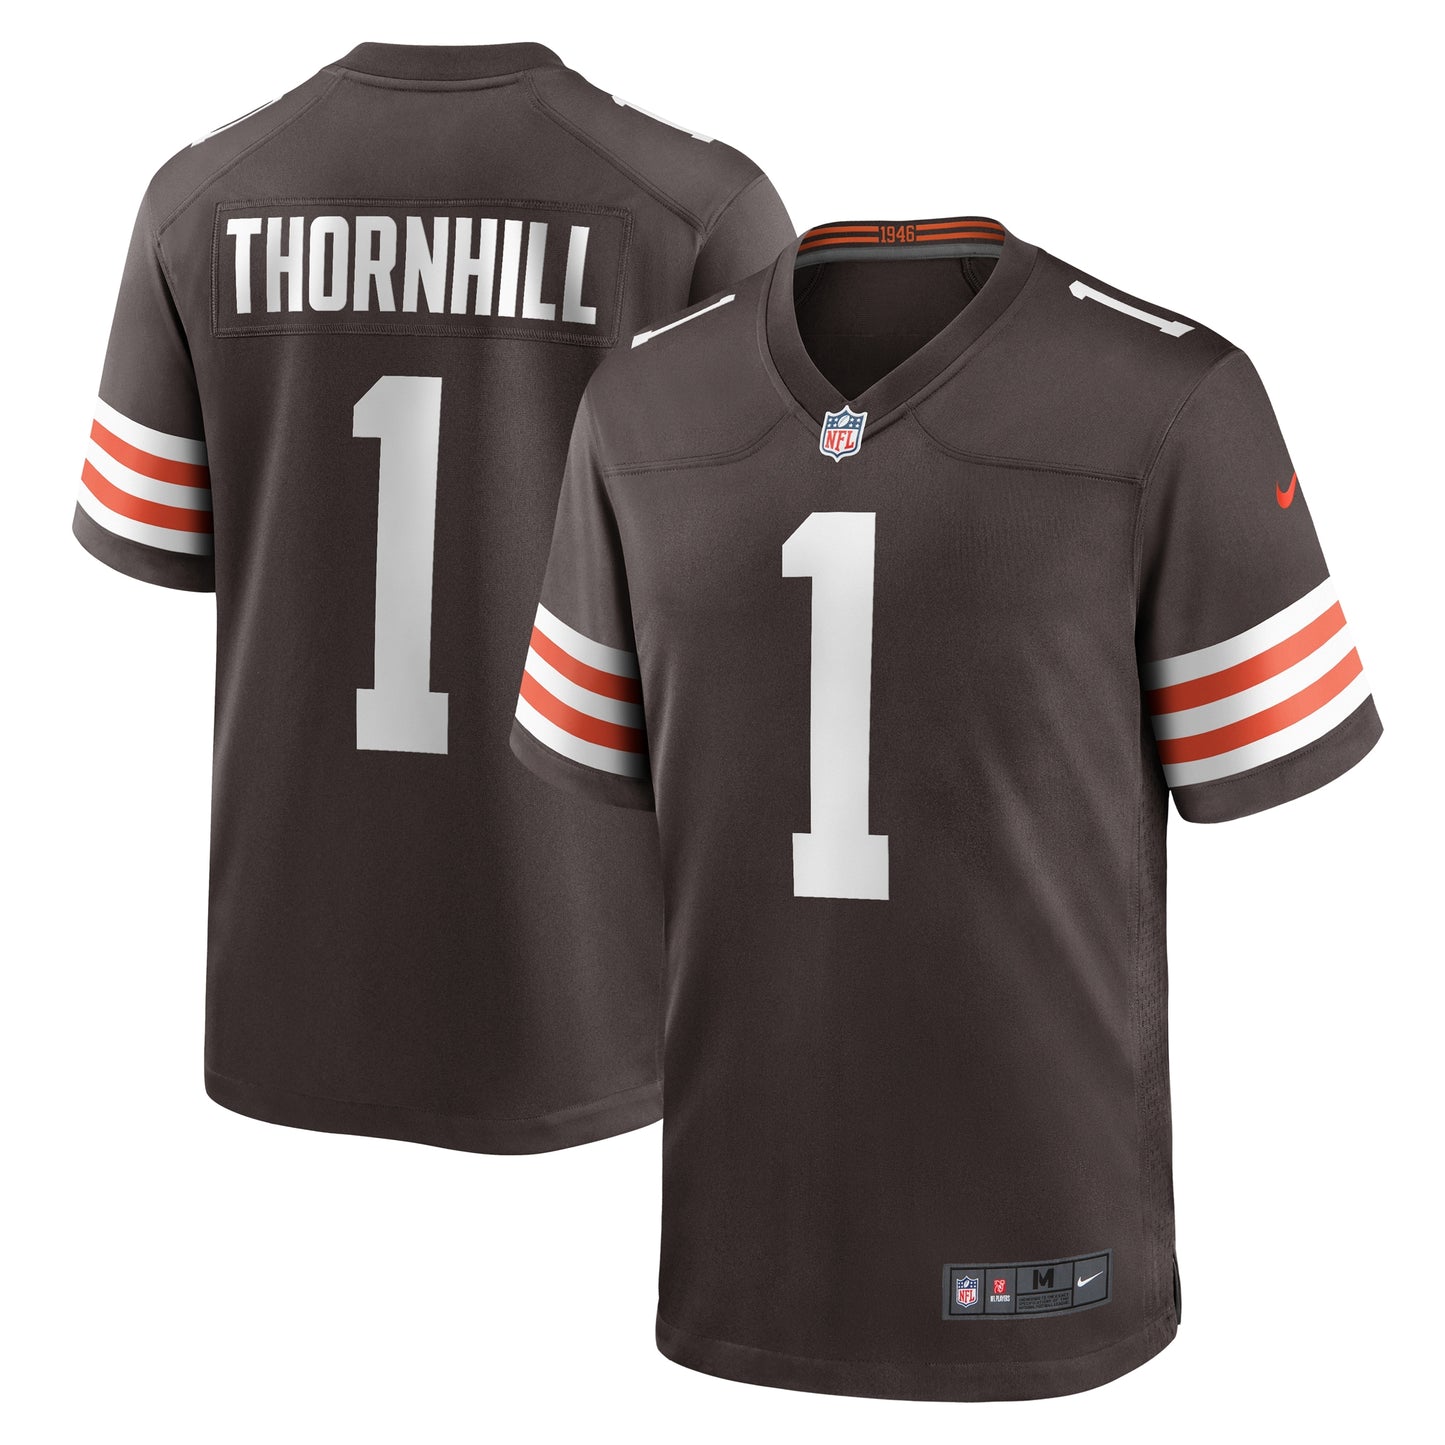 Juan Thornhill Cleveland Browns Nike Game Player Jersey - Brown